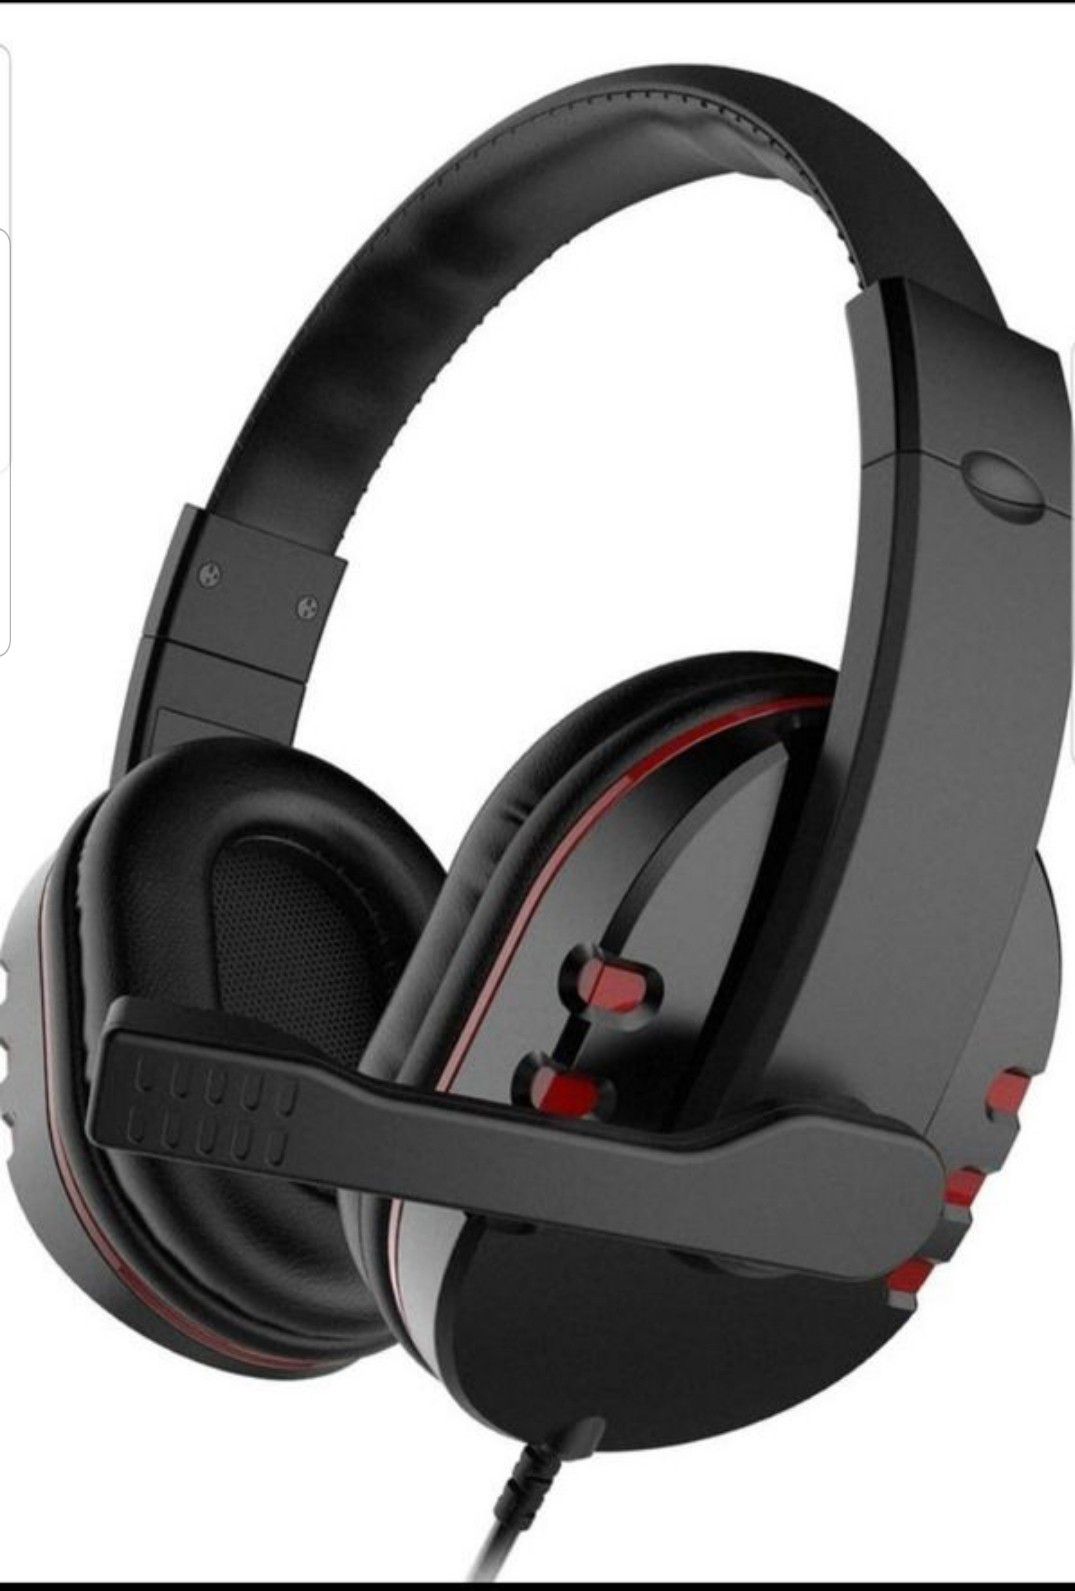 LESHP USB Wired Headphone with Stereo Micphone Fashion Gaming Headset Noise Cancelling Soft Memory Earmuffs for PS4 PS3 PC Game